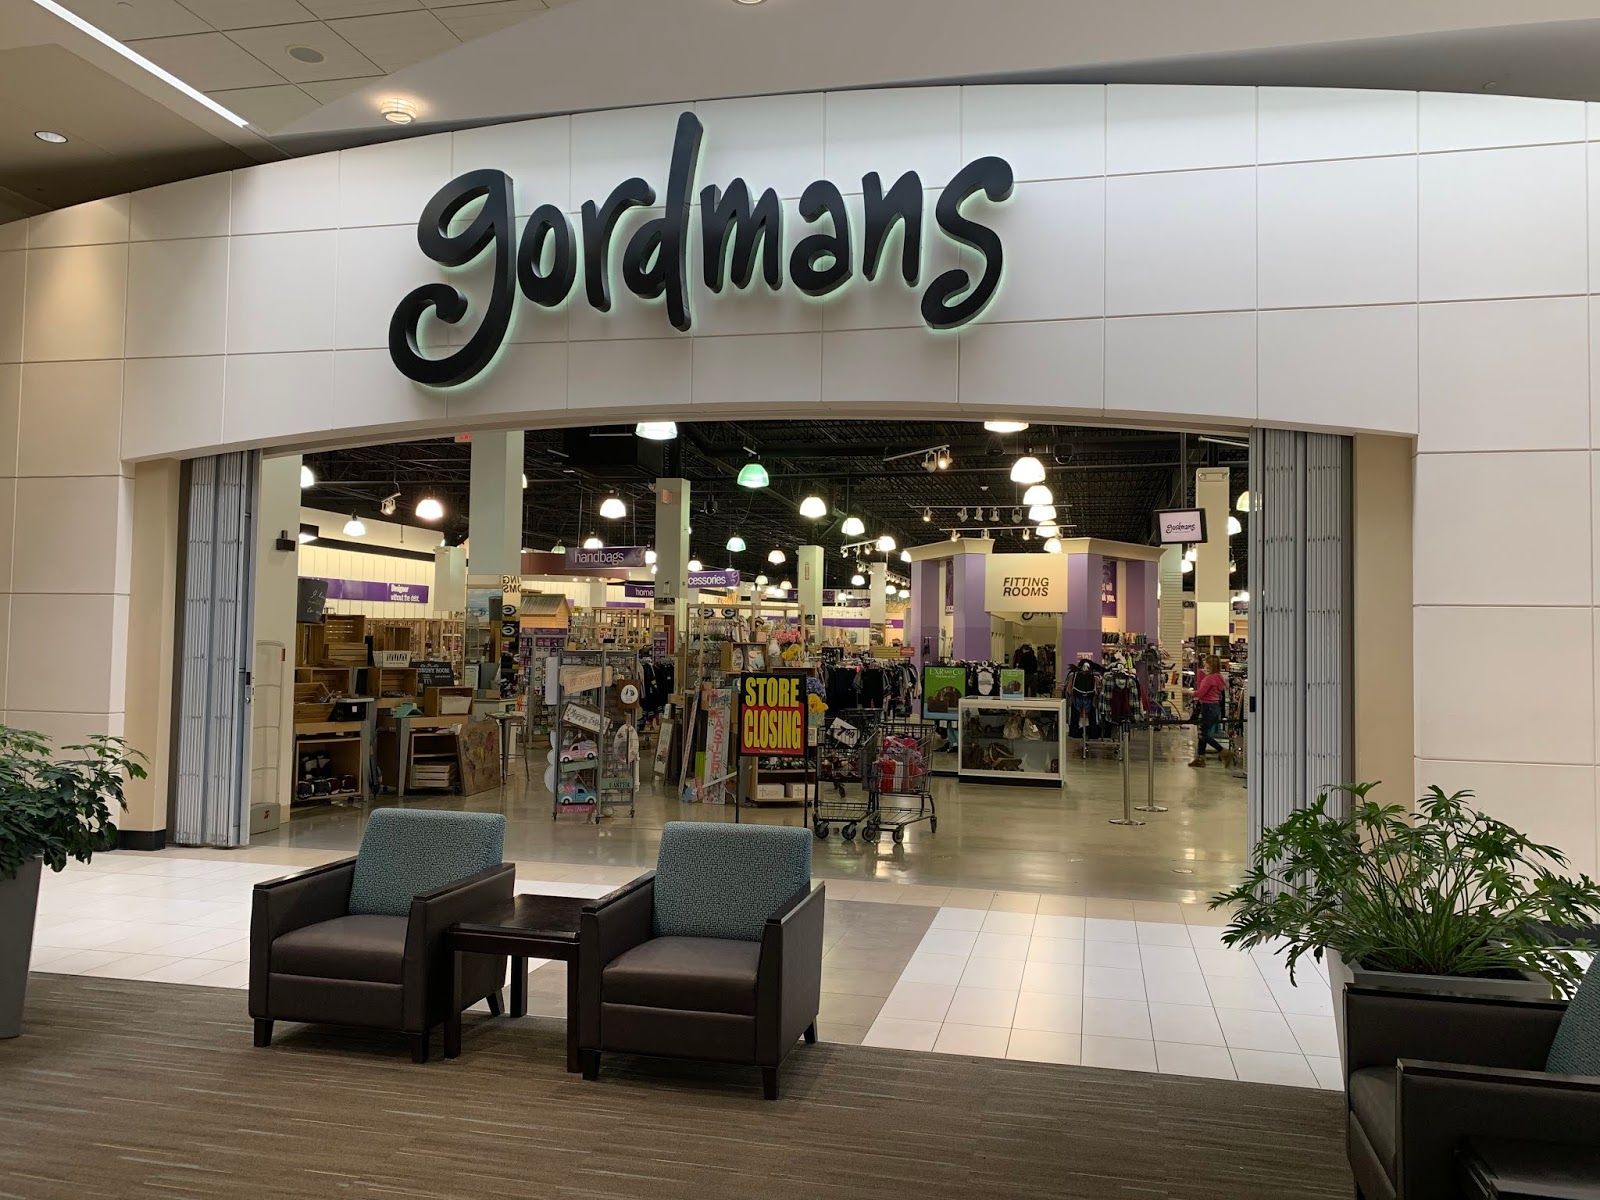 Retiring Guy's Digest: Scenes from East Towne Mall, where Gordman's is